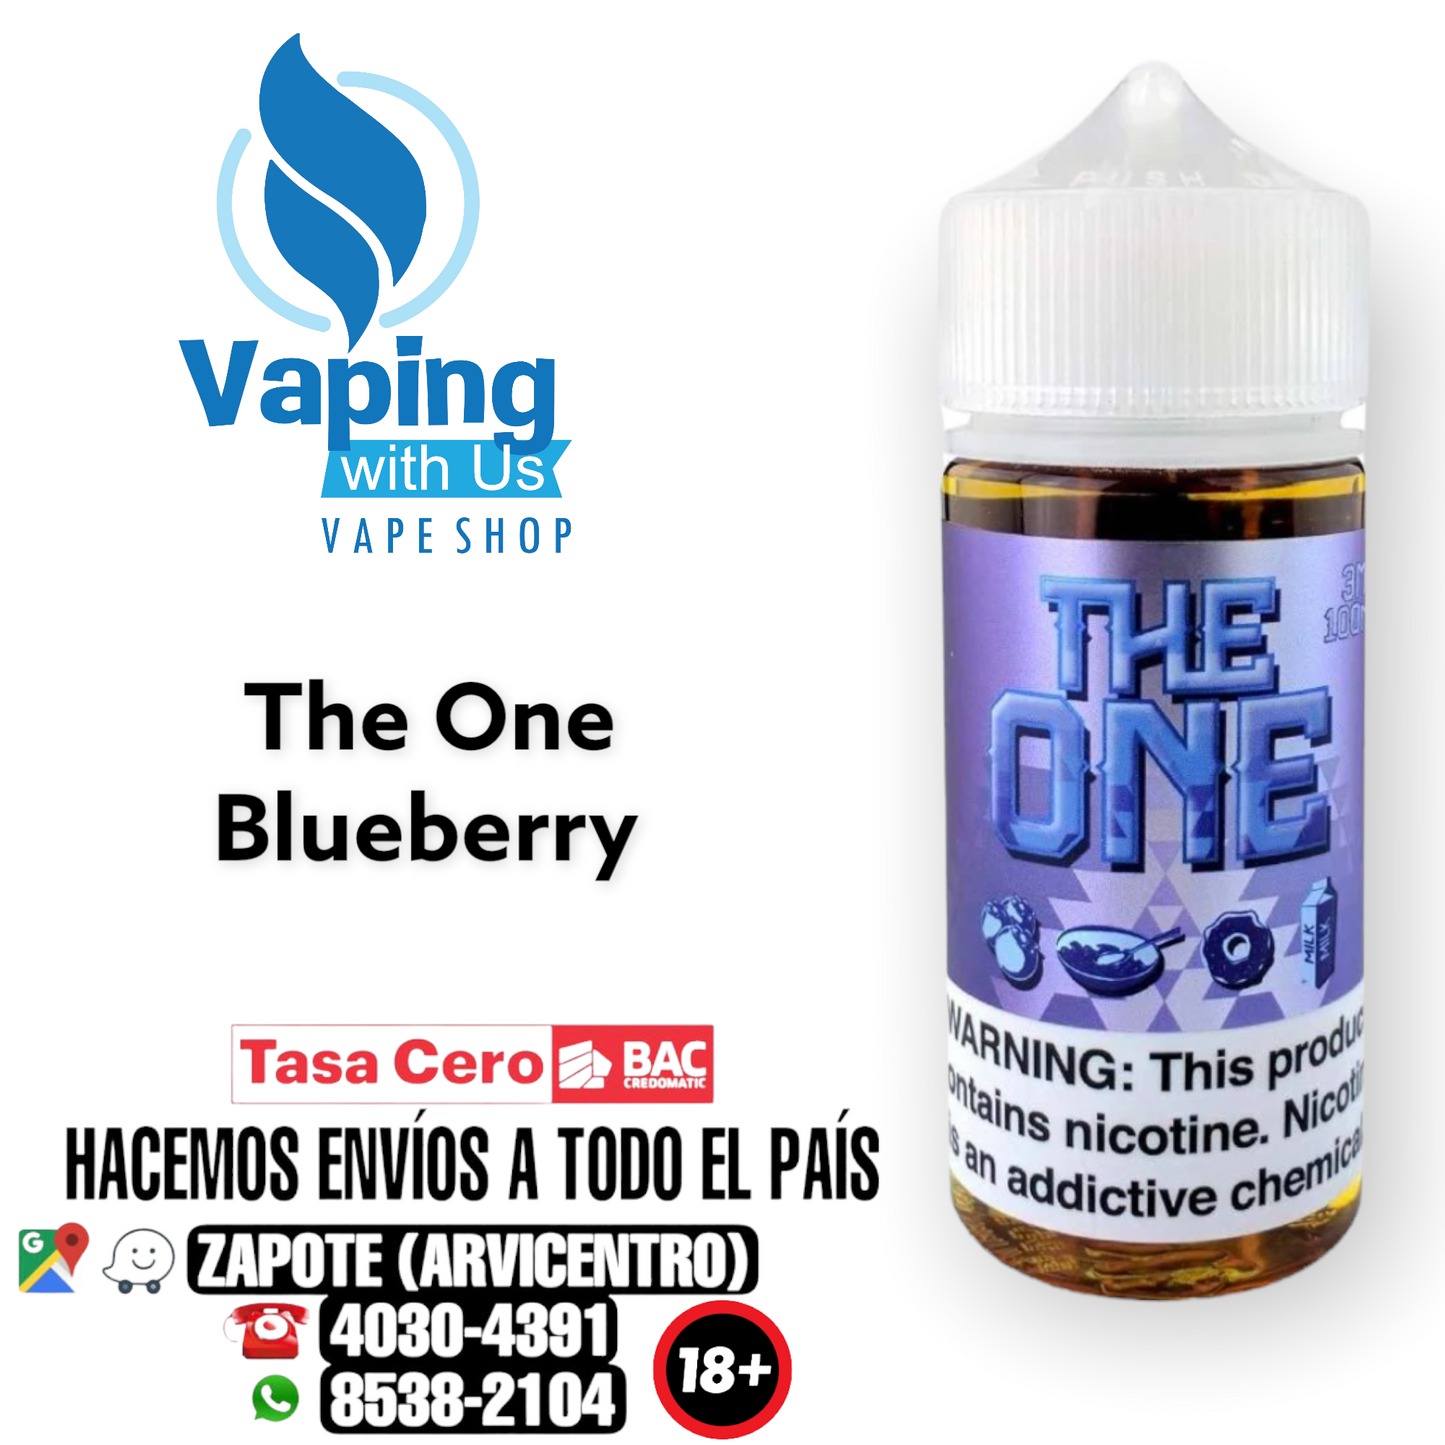 The One Blueberry